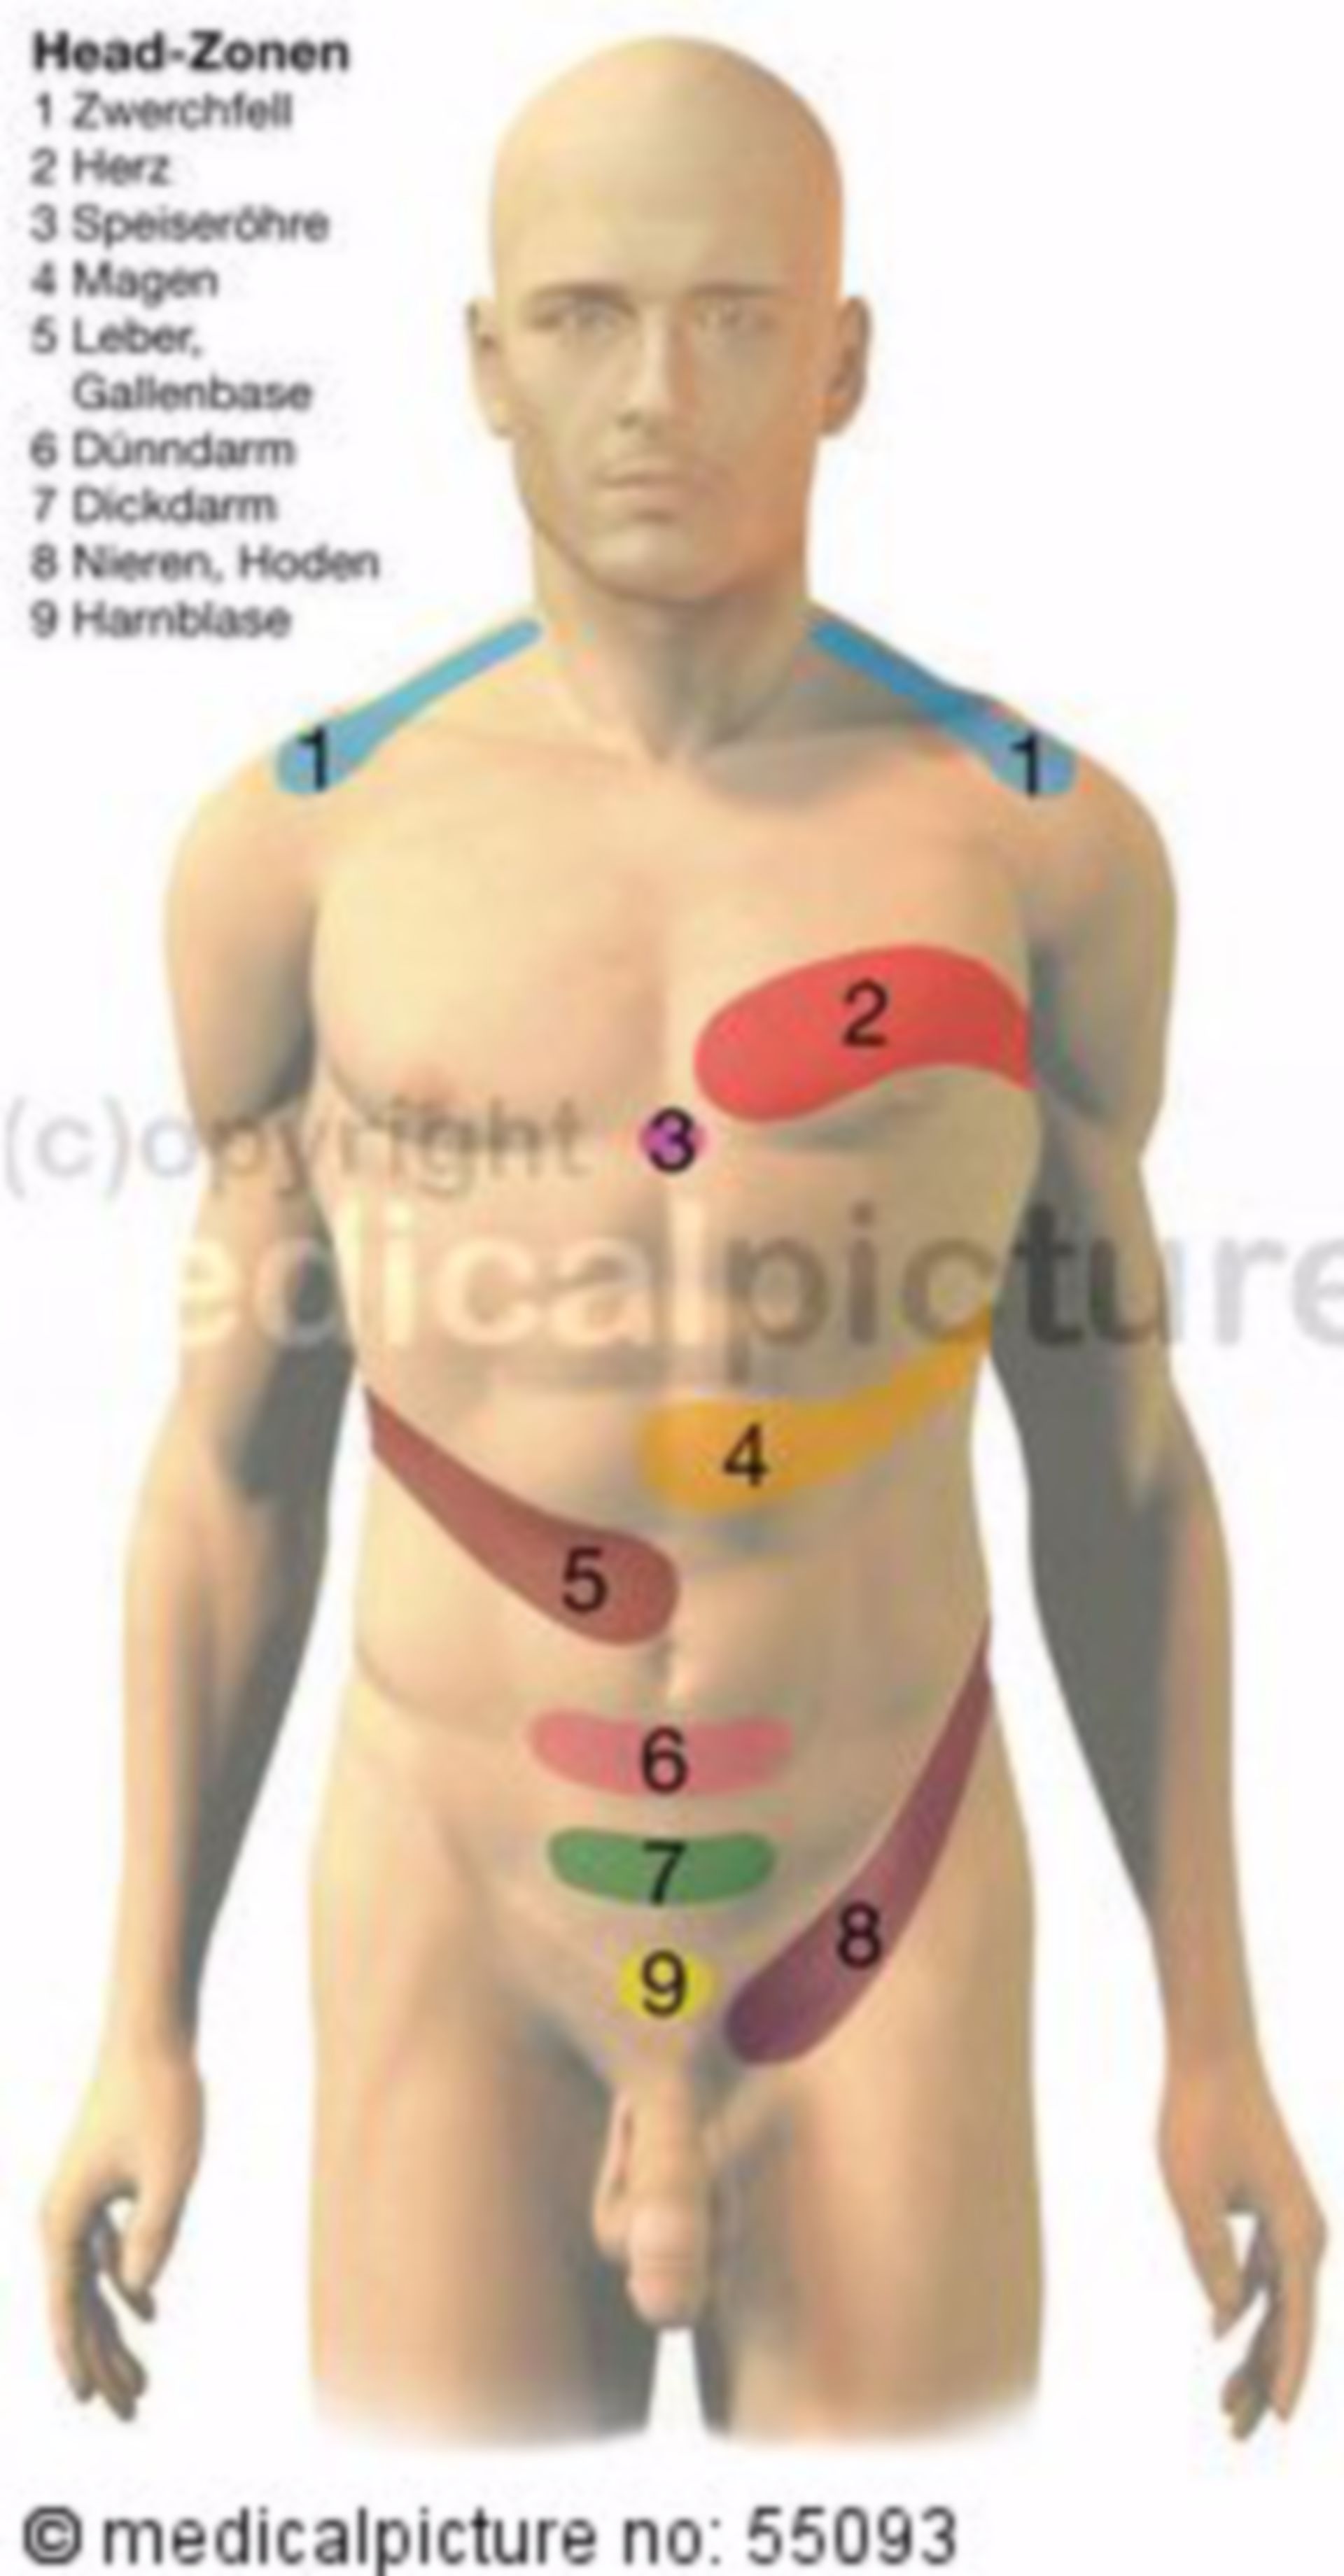 Zones of referred pain (overview)